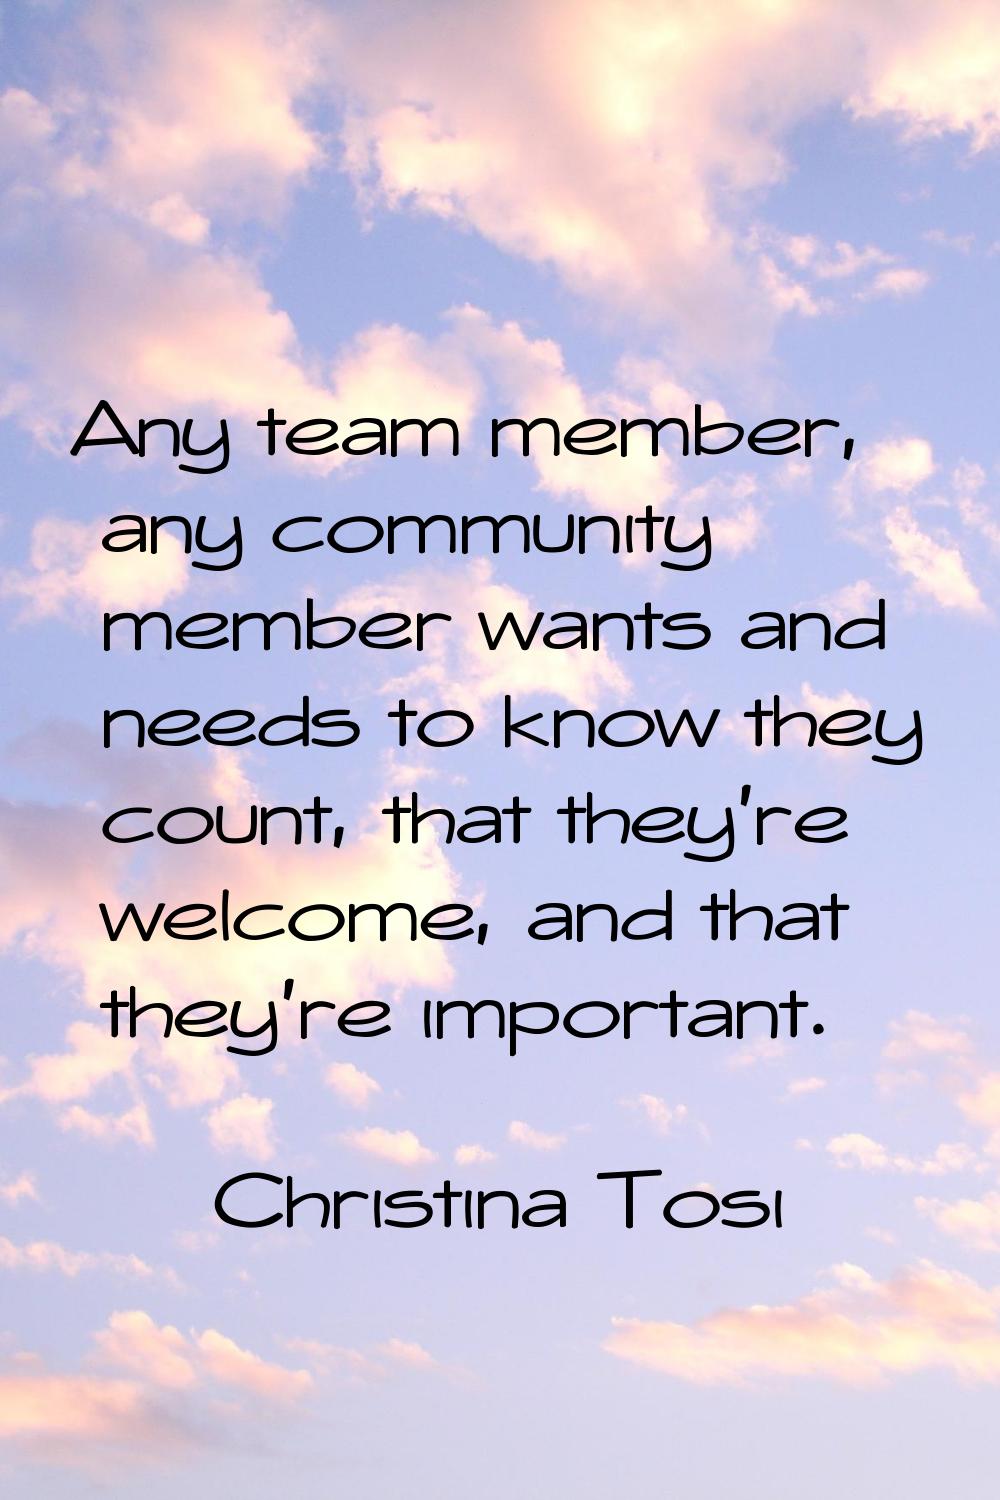 Any team member, any community member wants and needs to know they count, that they're welcome, and